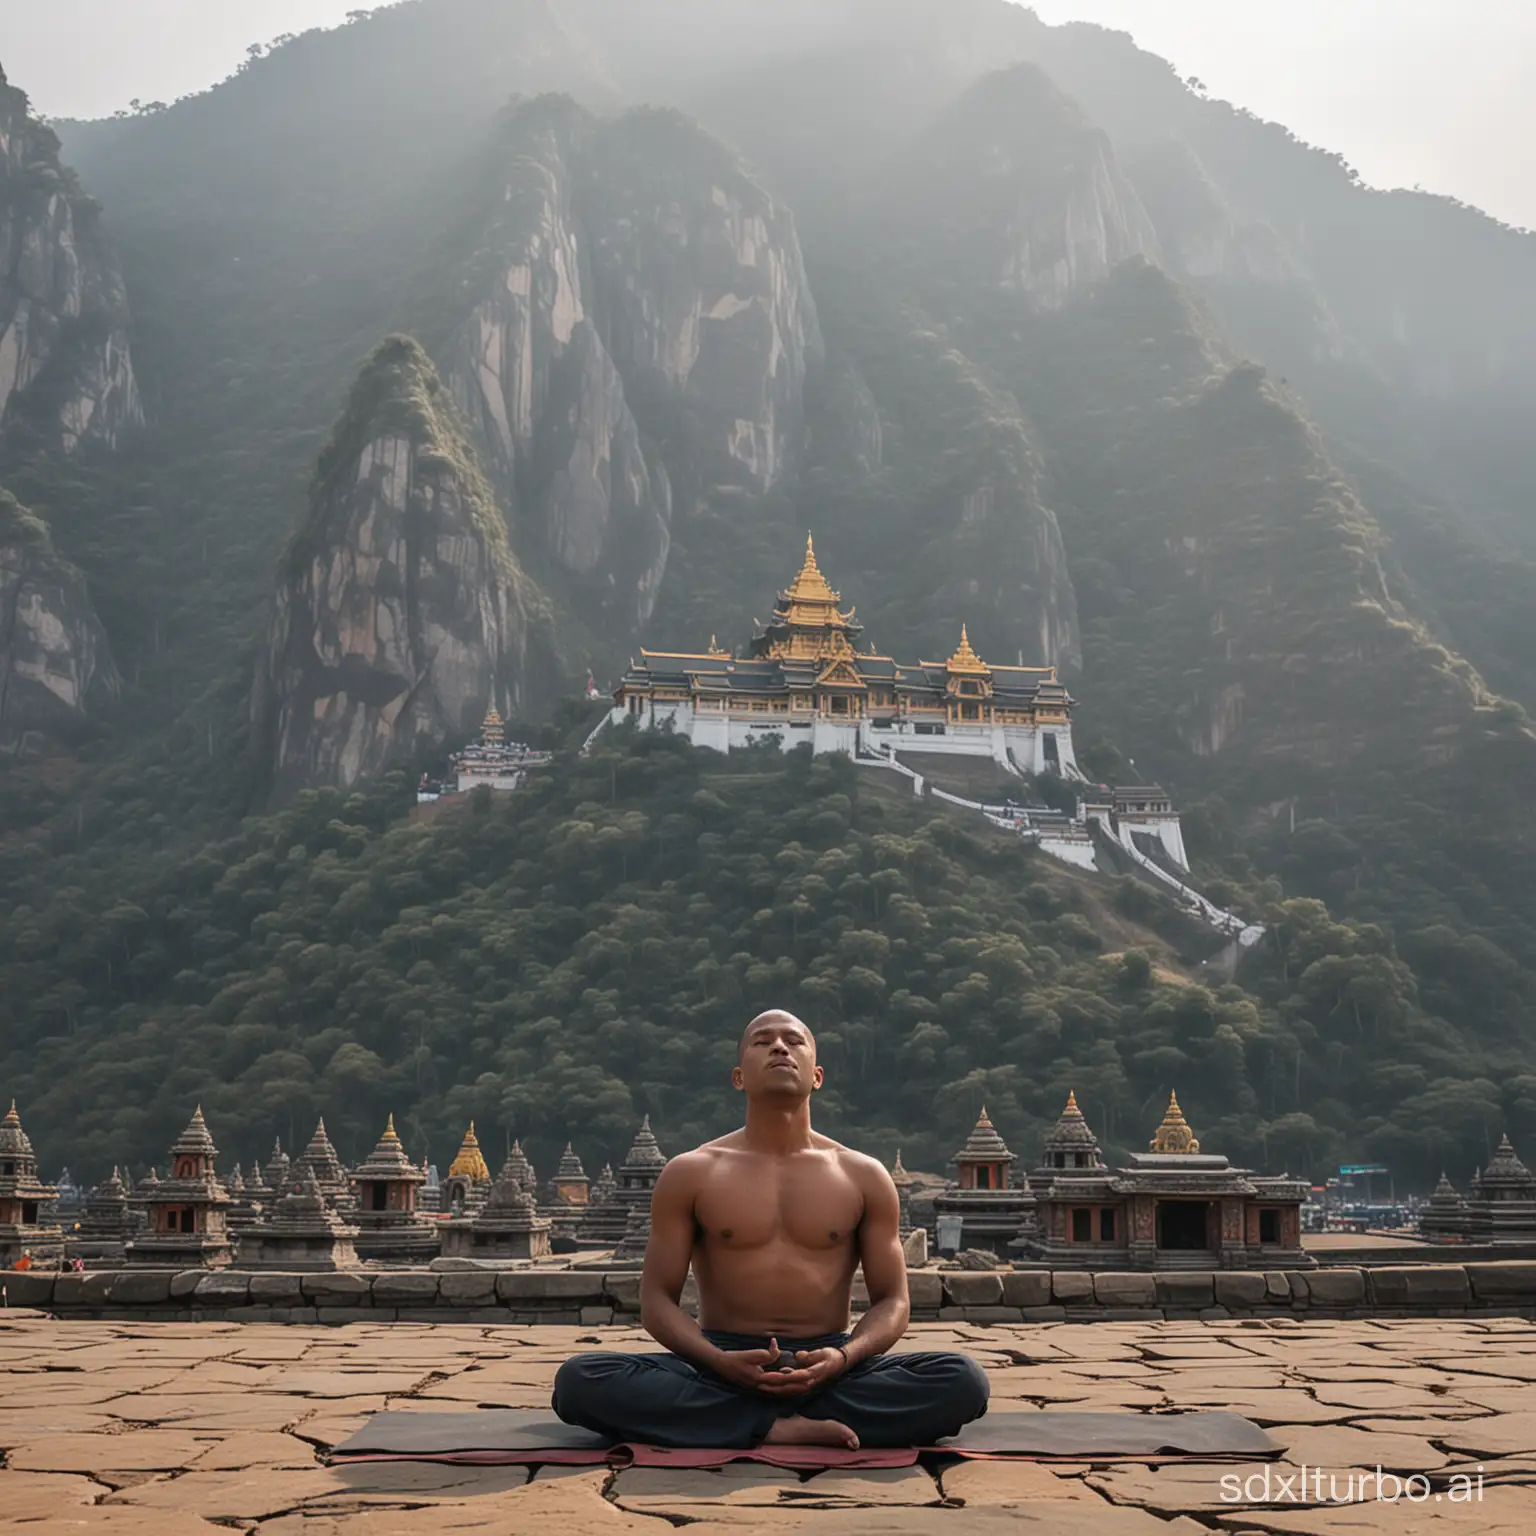 Serene-Meditation-Human-Contemplating-Amidst-Mountain-Scenery-and-Temple